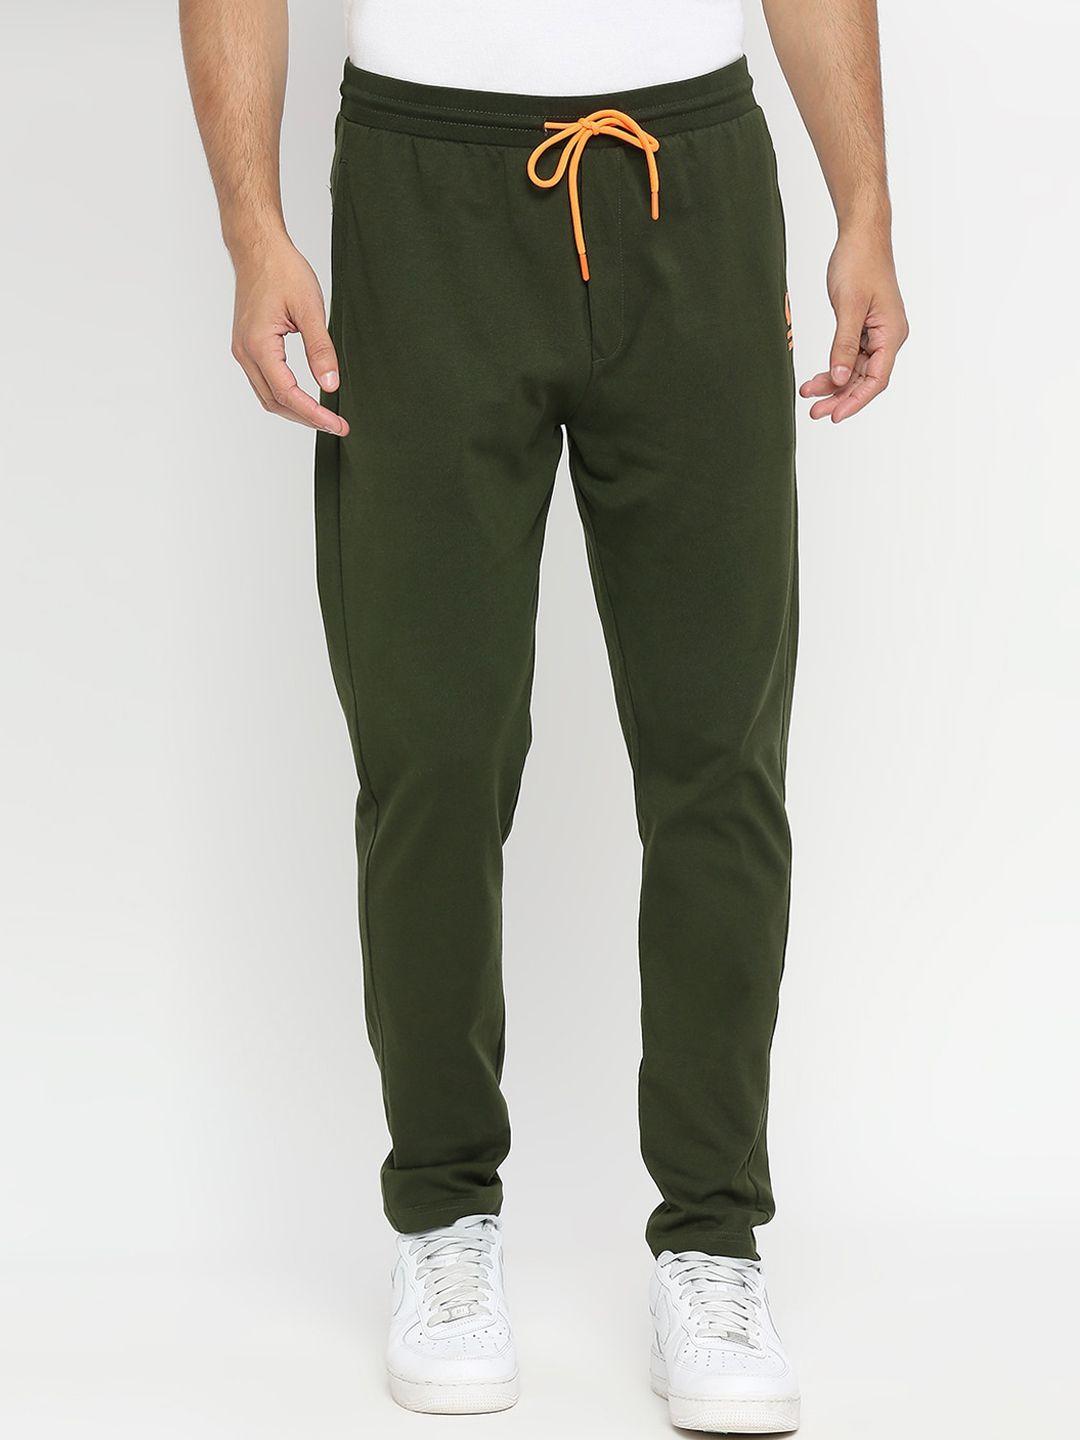 underjeans-by-spykar-men-olive-green-solid-trackpants